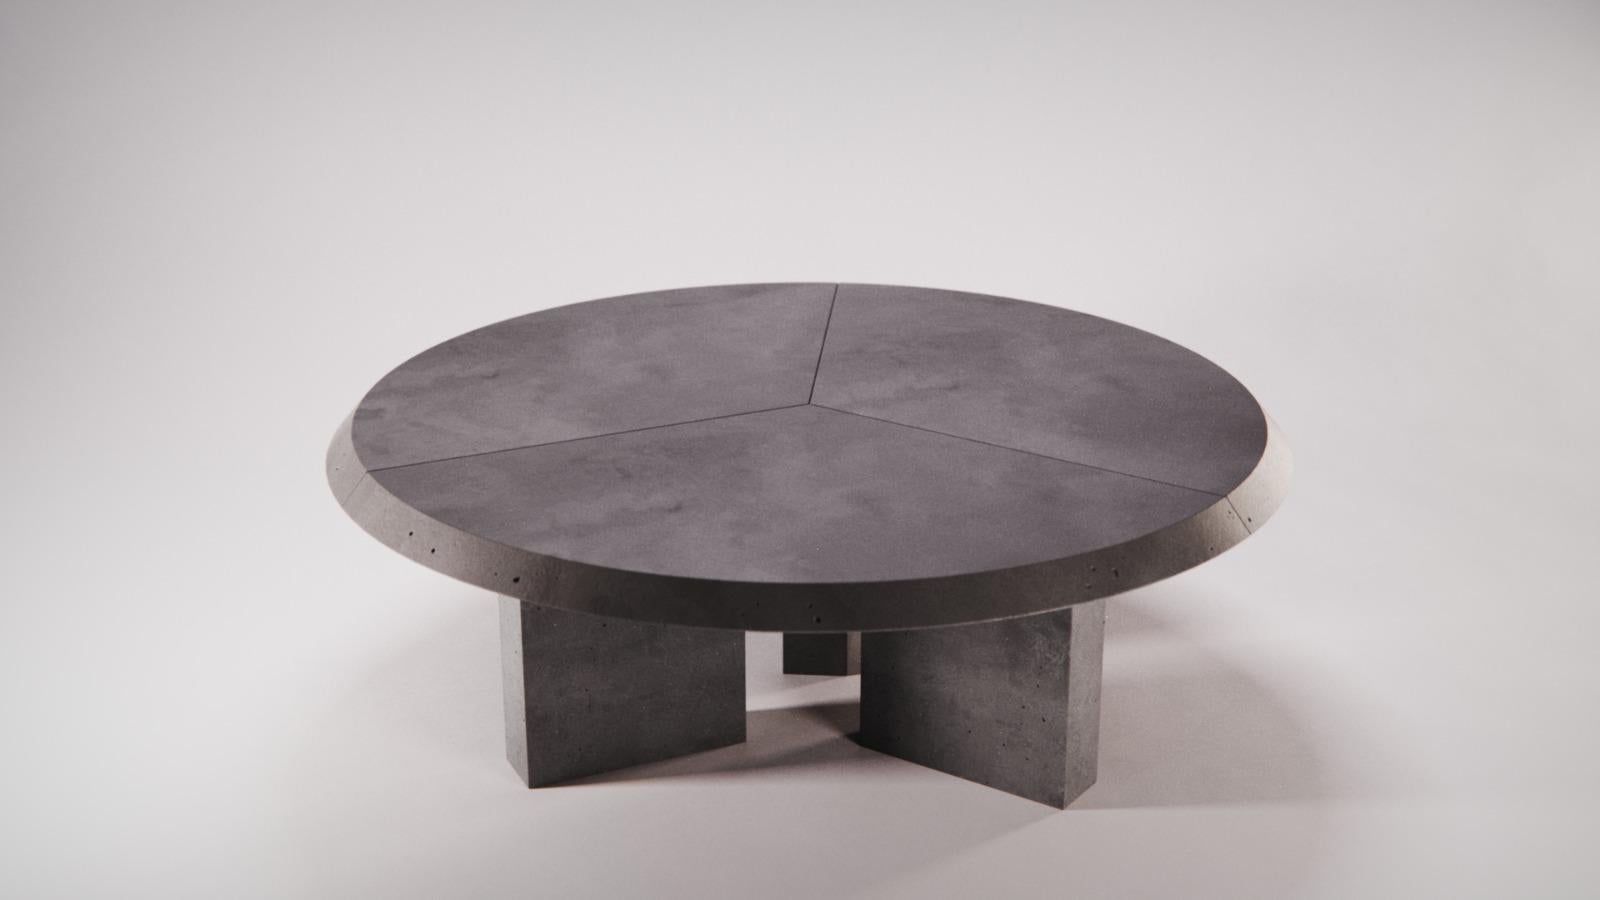 Laoban is a dining table which takes inspiration from the Asian aesthetic. Laoban was born from the desire to give importance and stability to the convivial moments that we savor every day. Strongly inspired, in the circular shape and in the